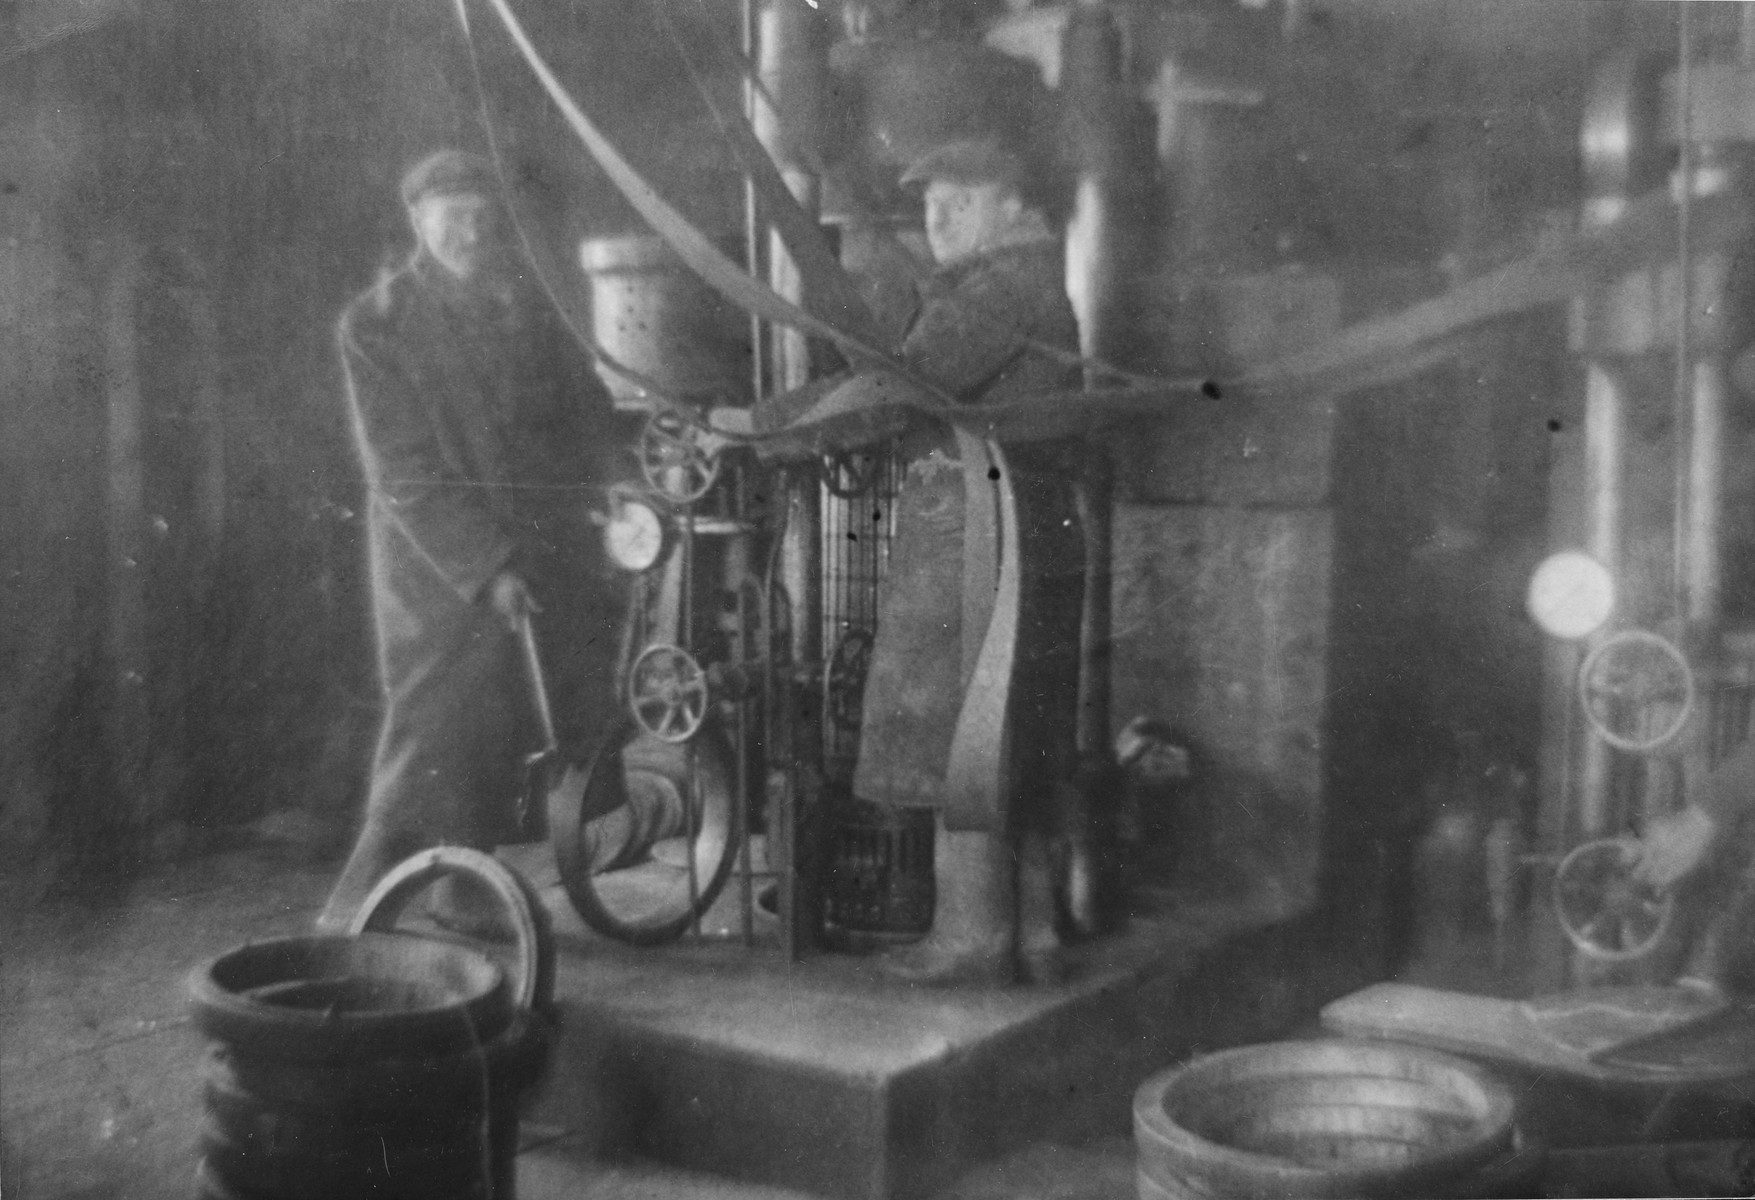 Jewish men working at an oil press in the Glubokoye ghetto.

Among those pictured is Moshe Katz.